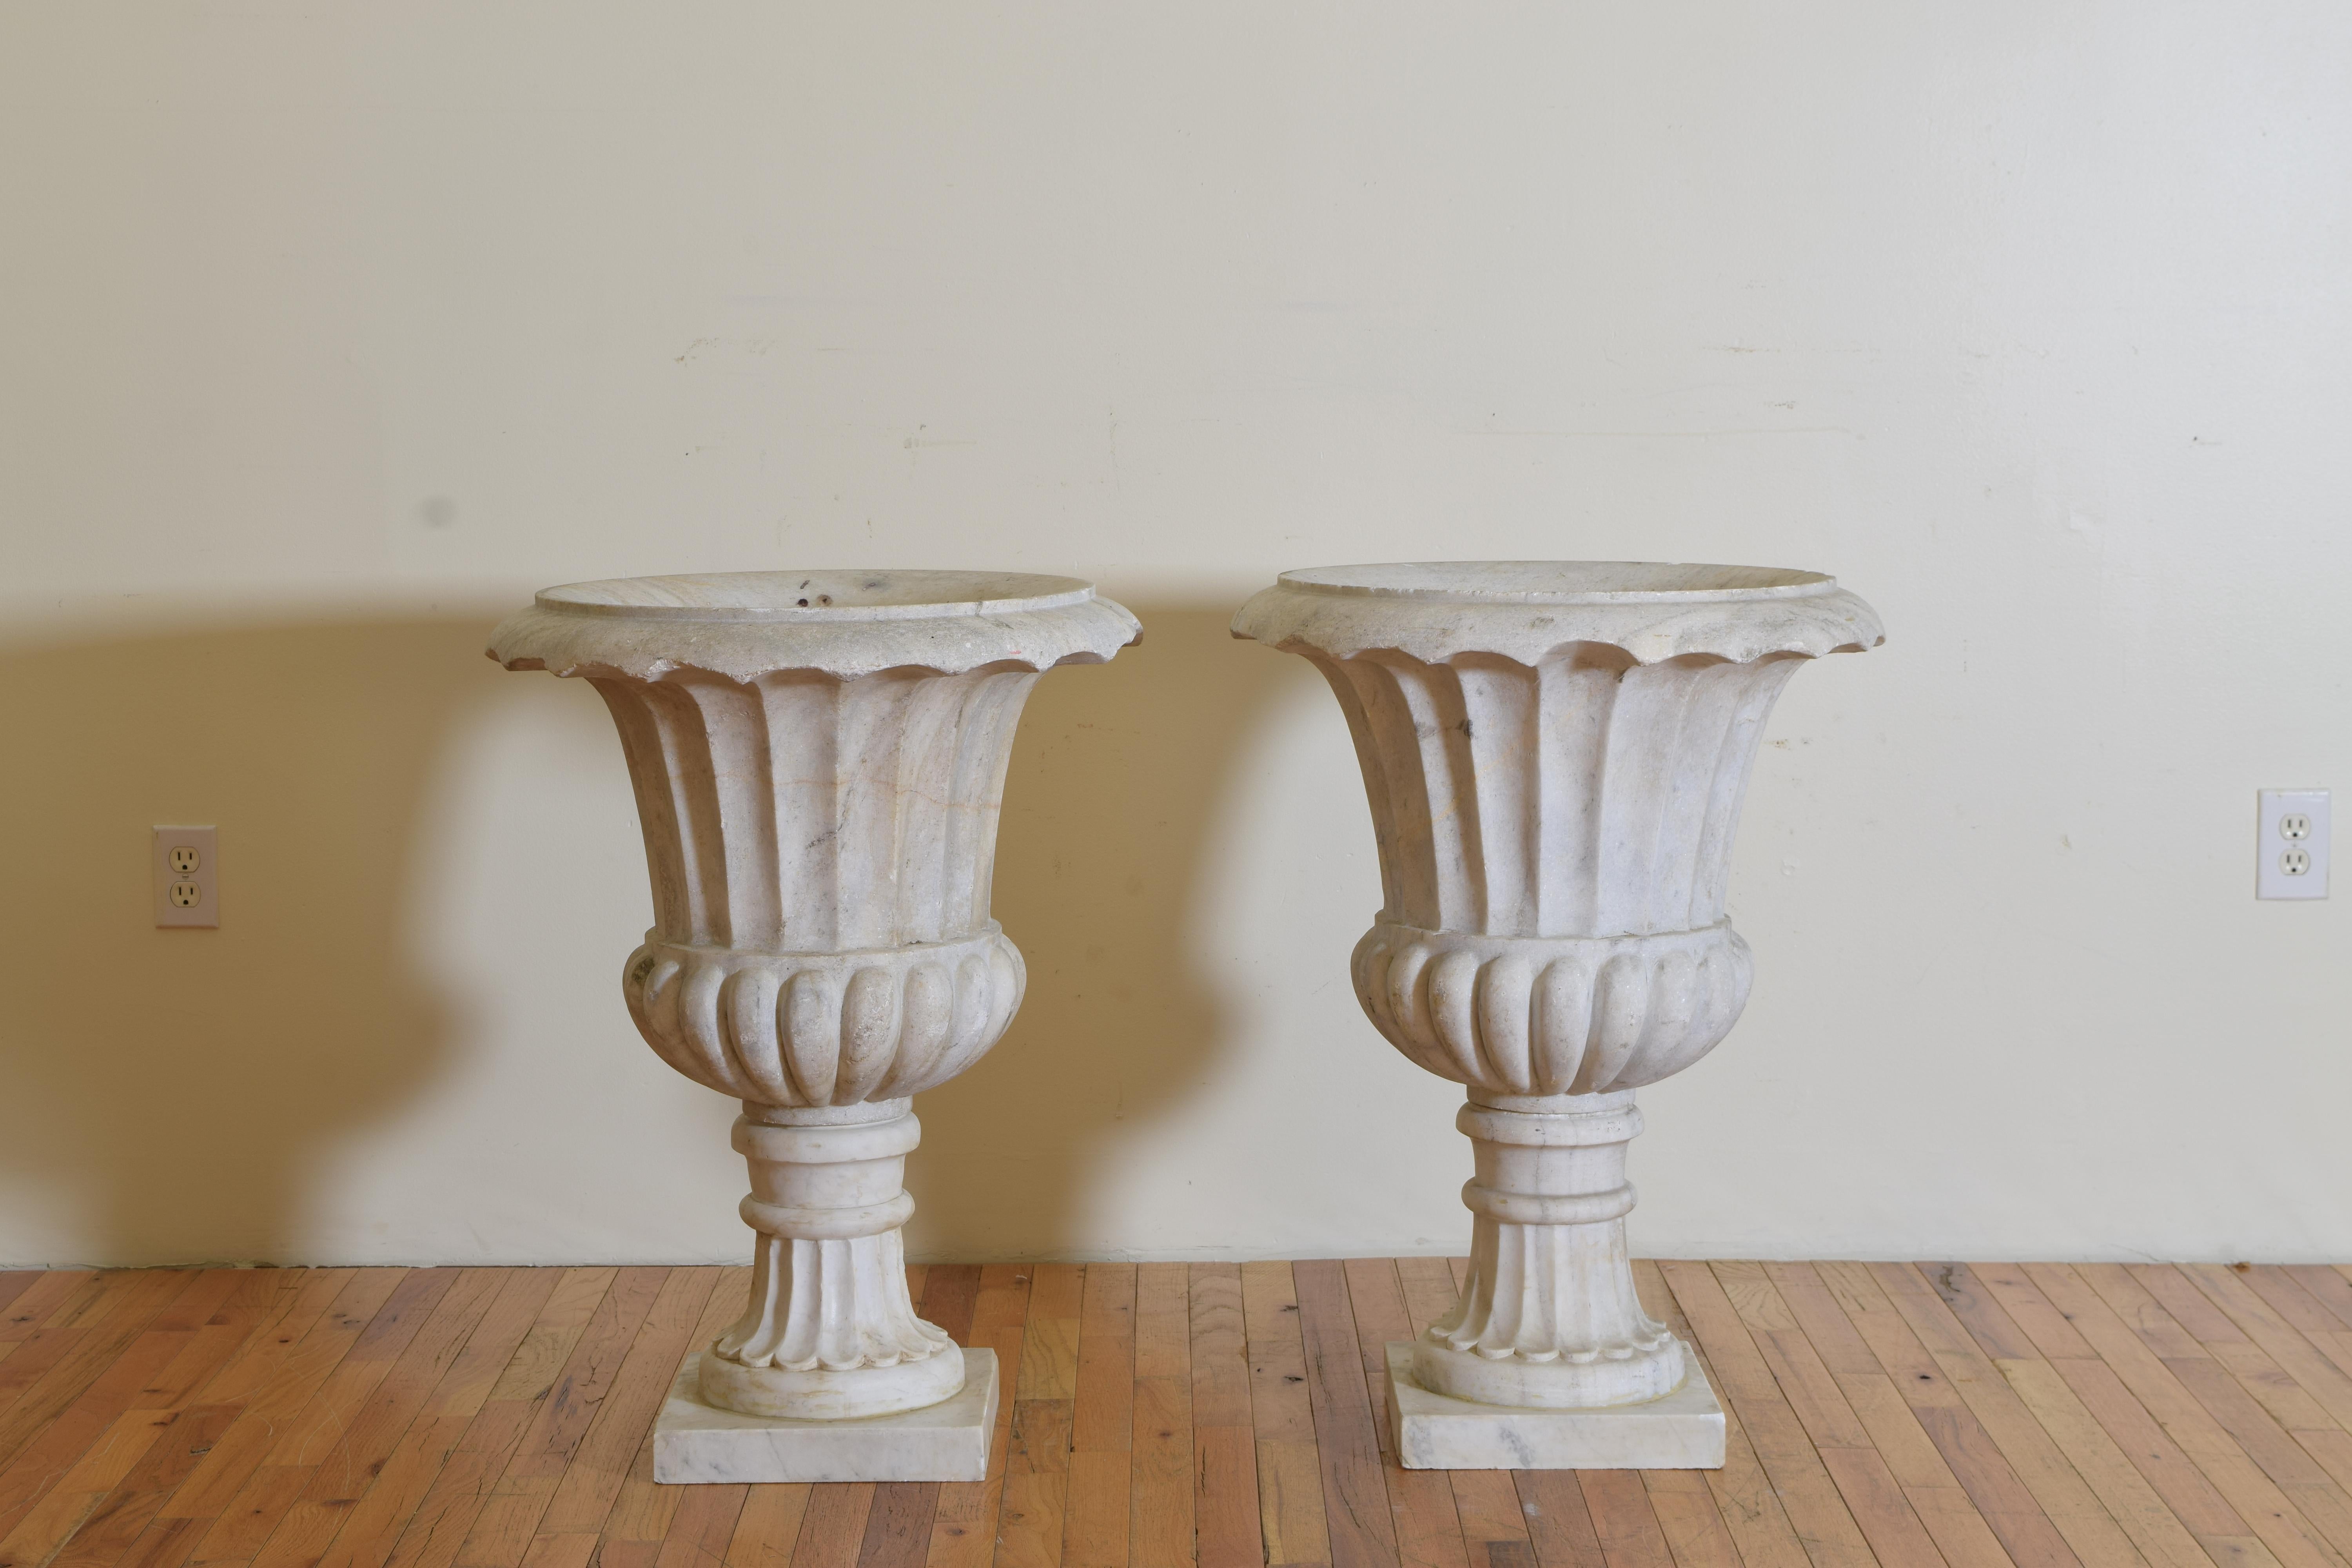 Carrara Marble Pair of Large Italian Marble Urns from the Late 18th Century